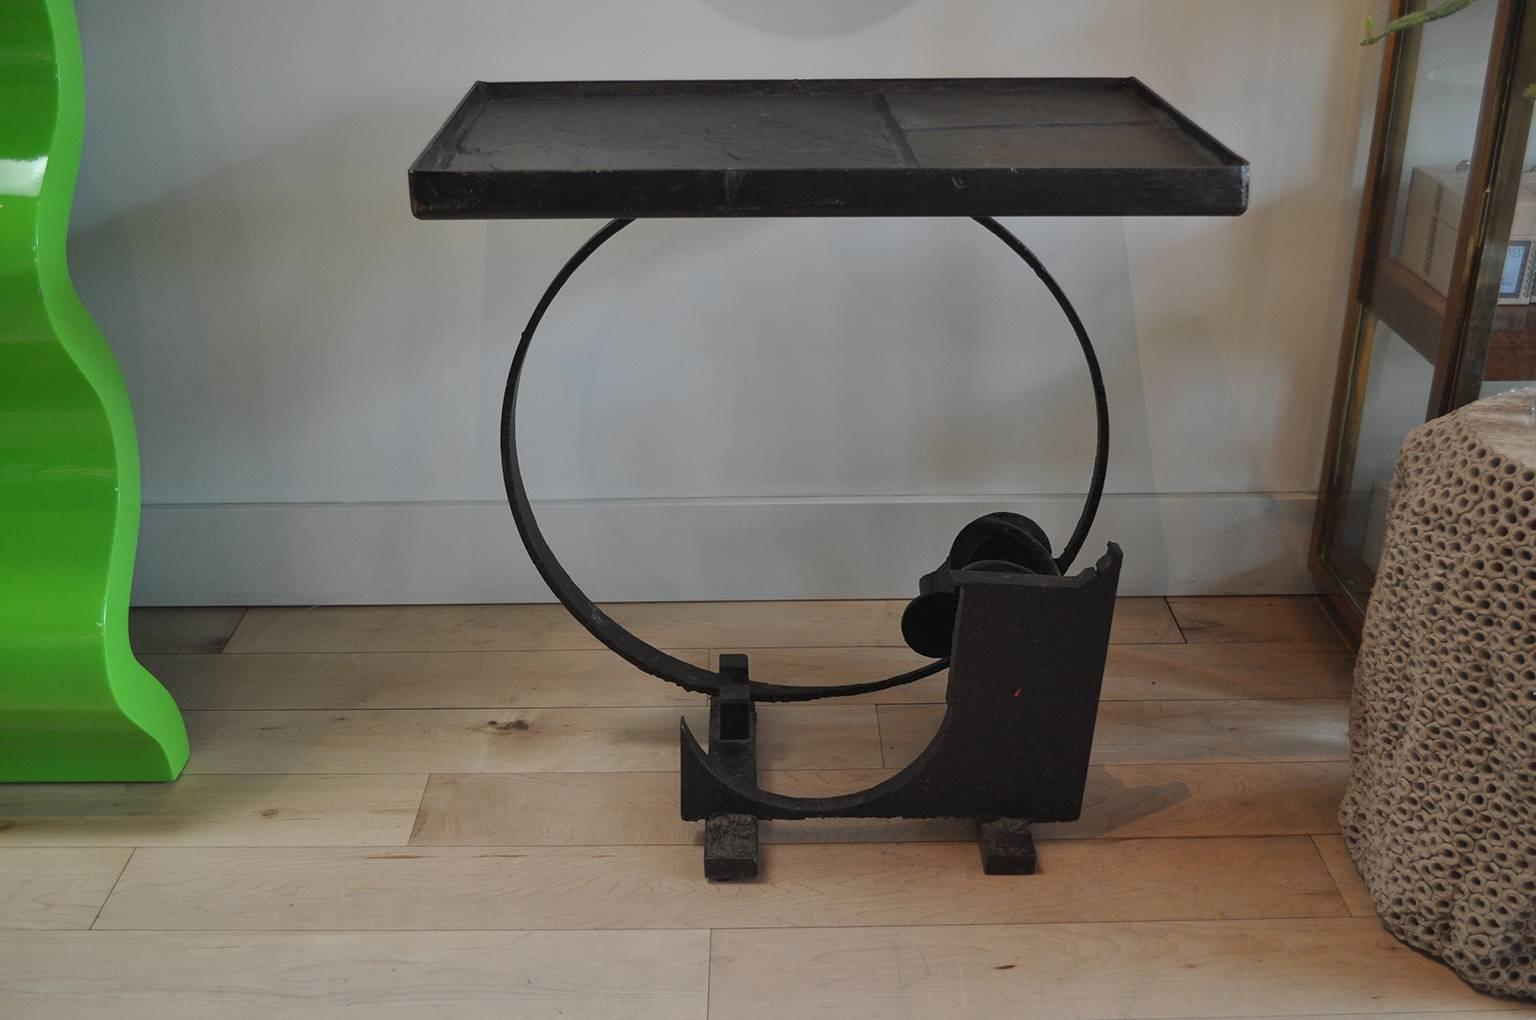 Exquisite hand welded assemblage brutalist table with grey stone table top inset.